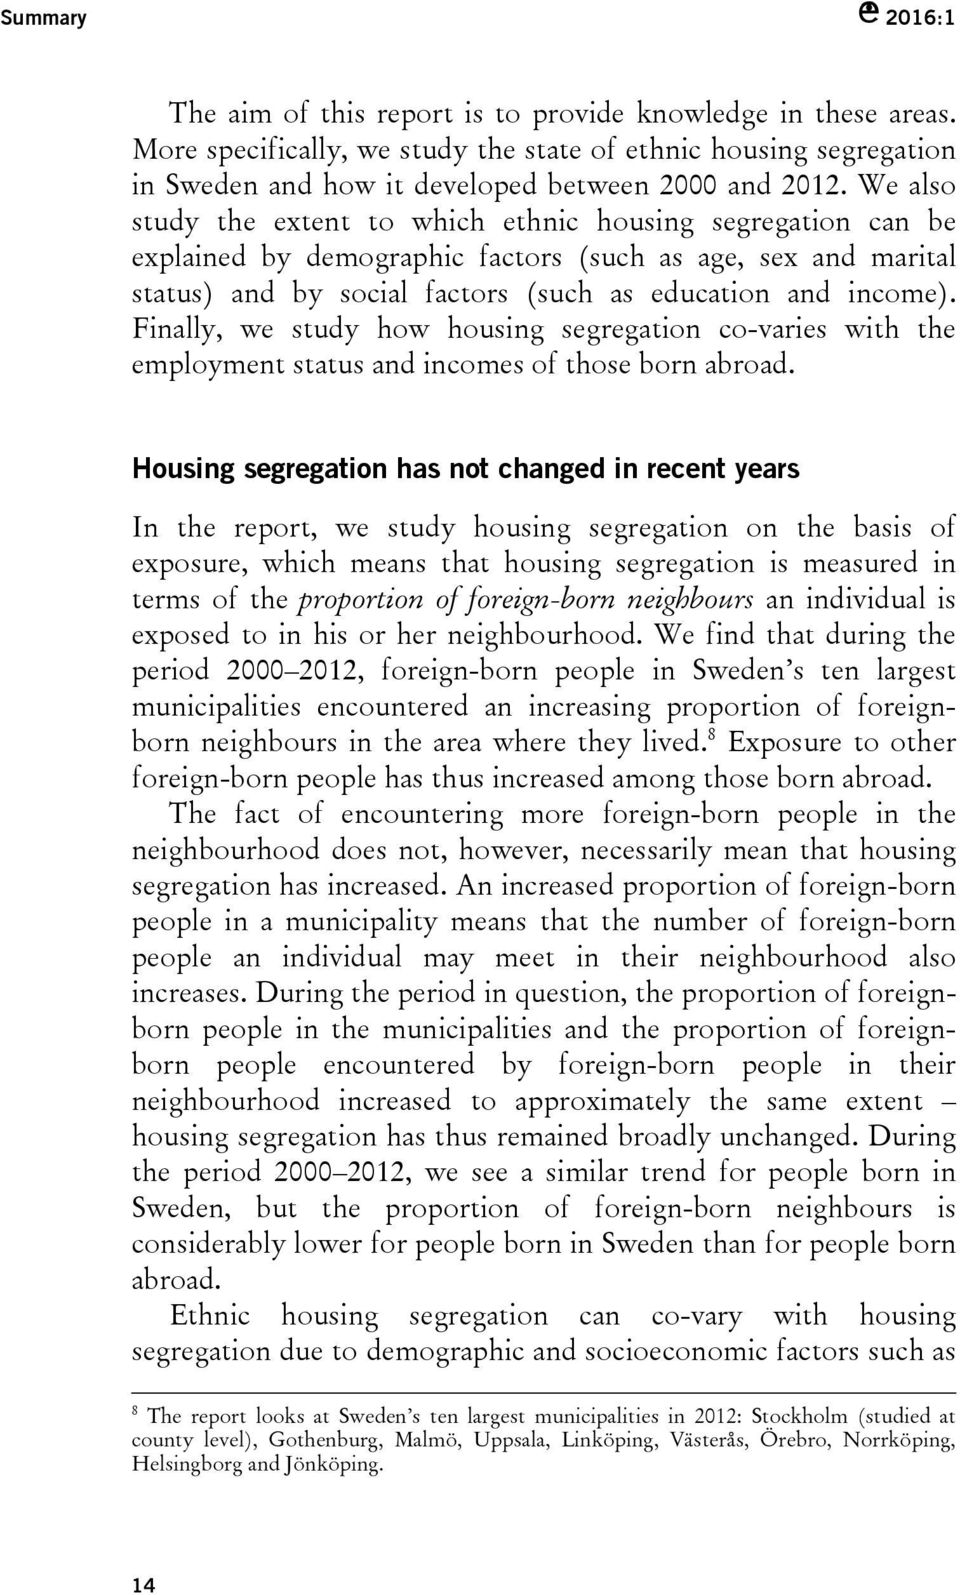 Finally, we study how housing segregation co-varies with the employment status and incomes of those born abroad.